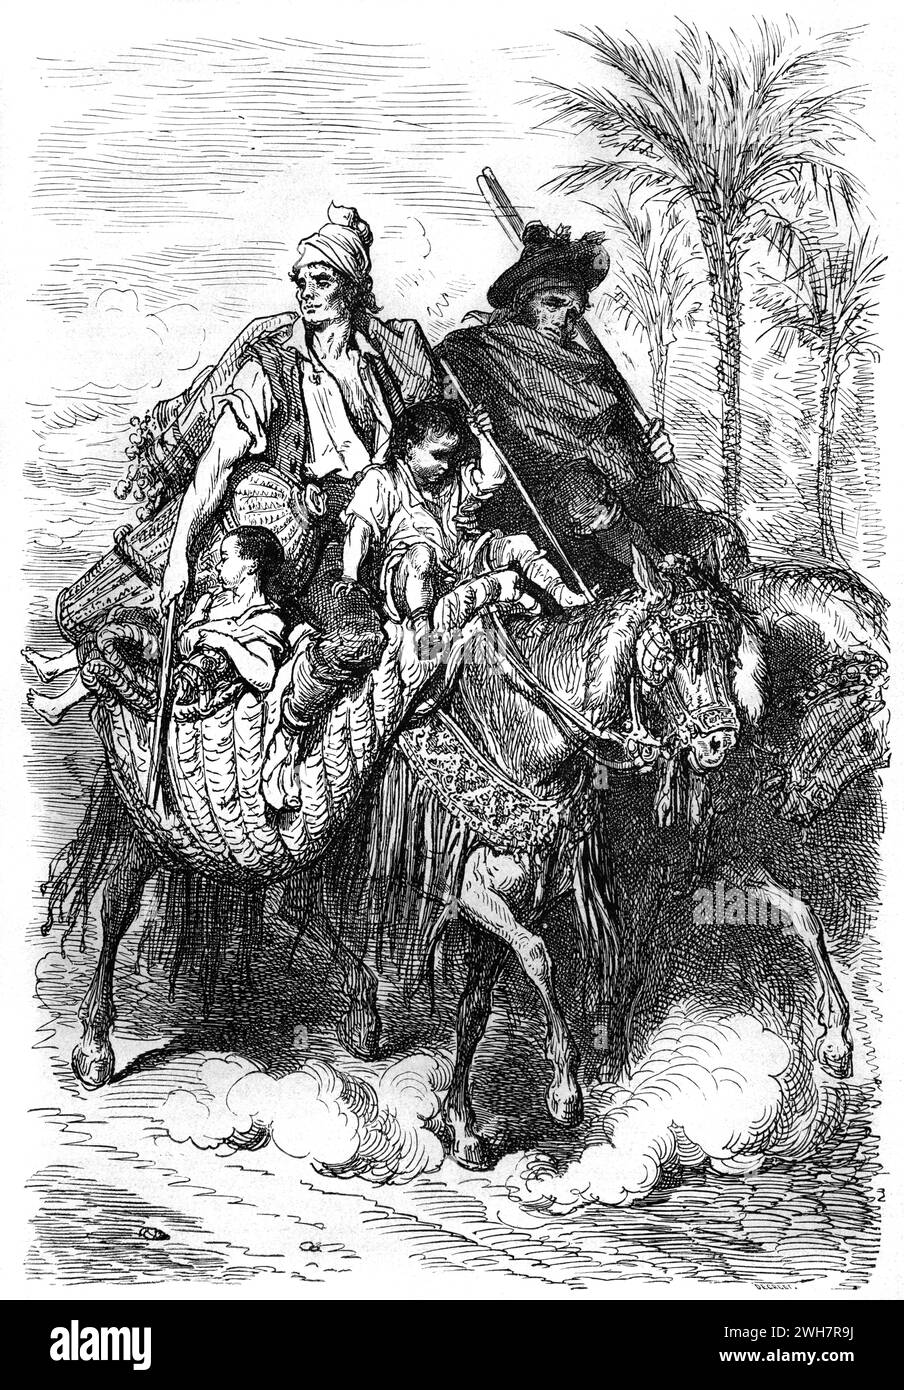 Spanish Peasants, Peasant Family or Poor Family Riding Horseback or on Donkeys on Dusty Road near Carcaixent Valencia Spain. Vintage or Historic Engraving or Illustration by Gustave Doré 1863 Stock Photo